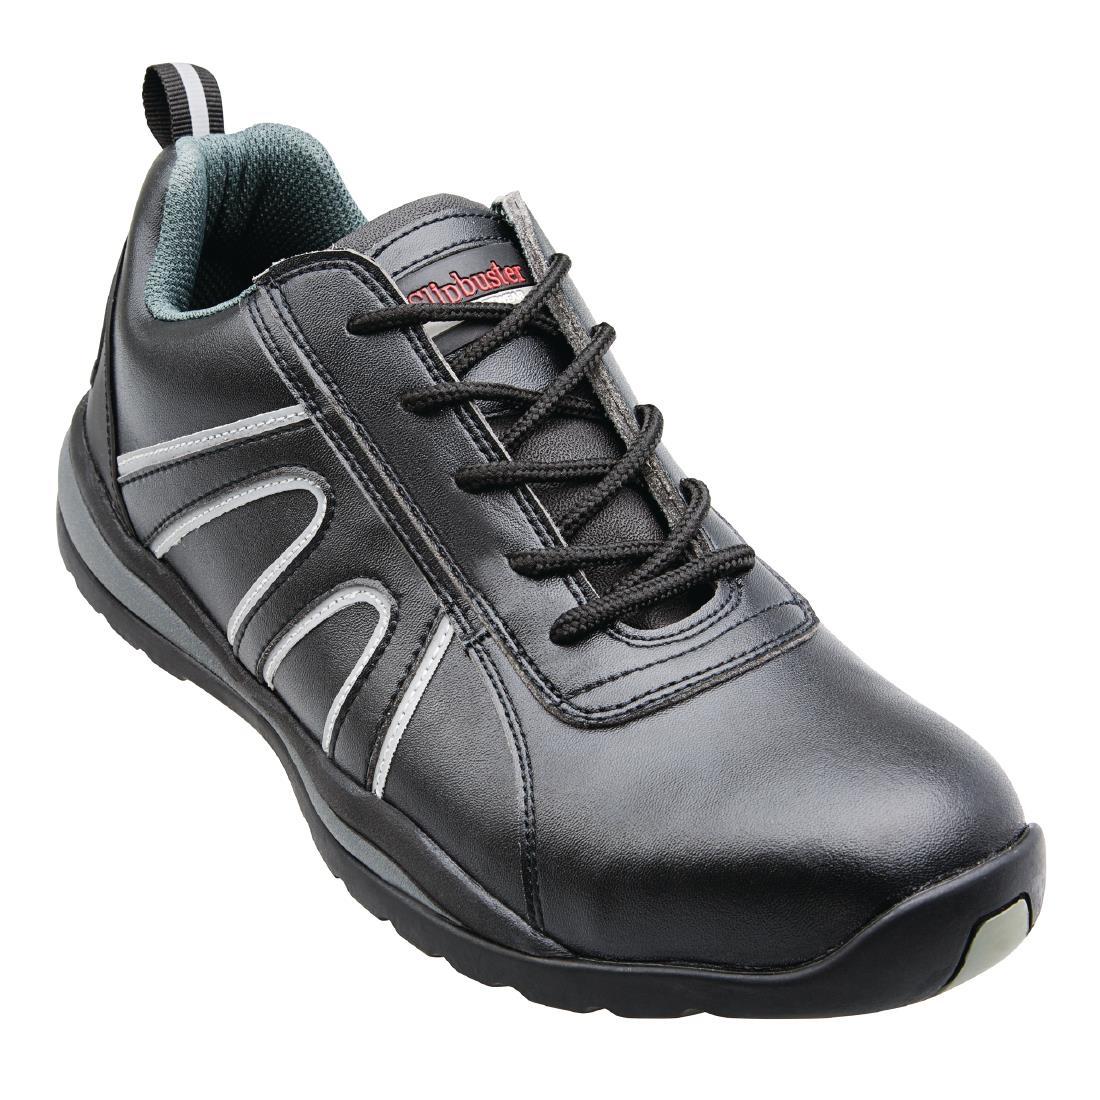 Slipbuster Safety Trainers Black 44 - A708-44  - 6